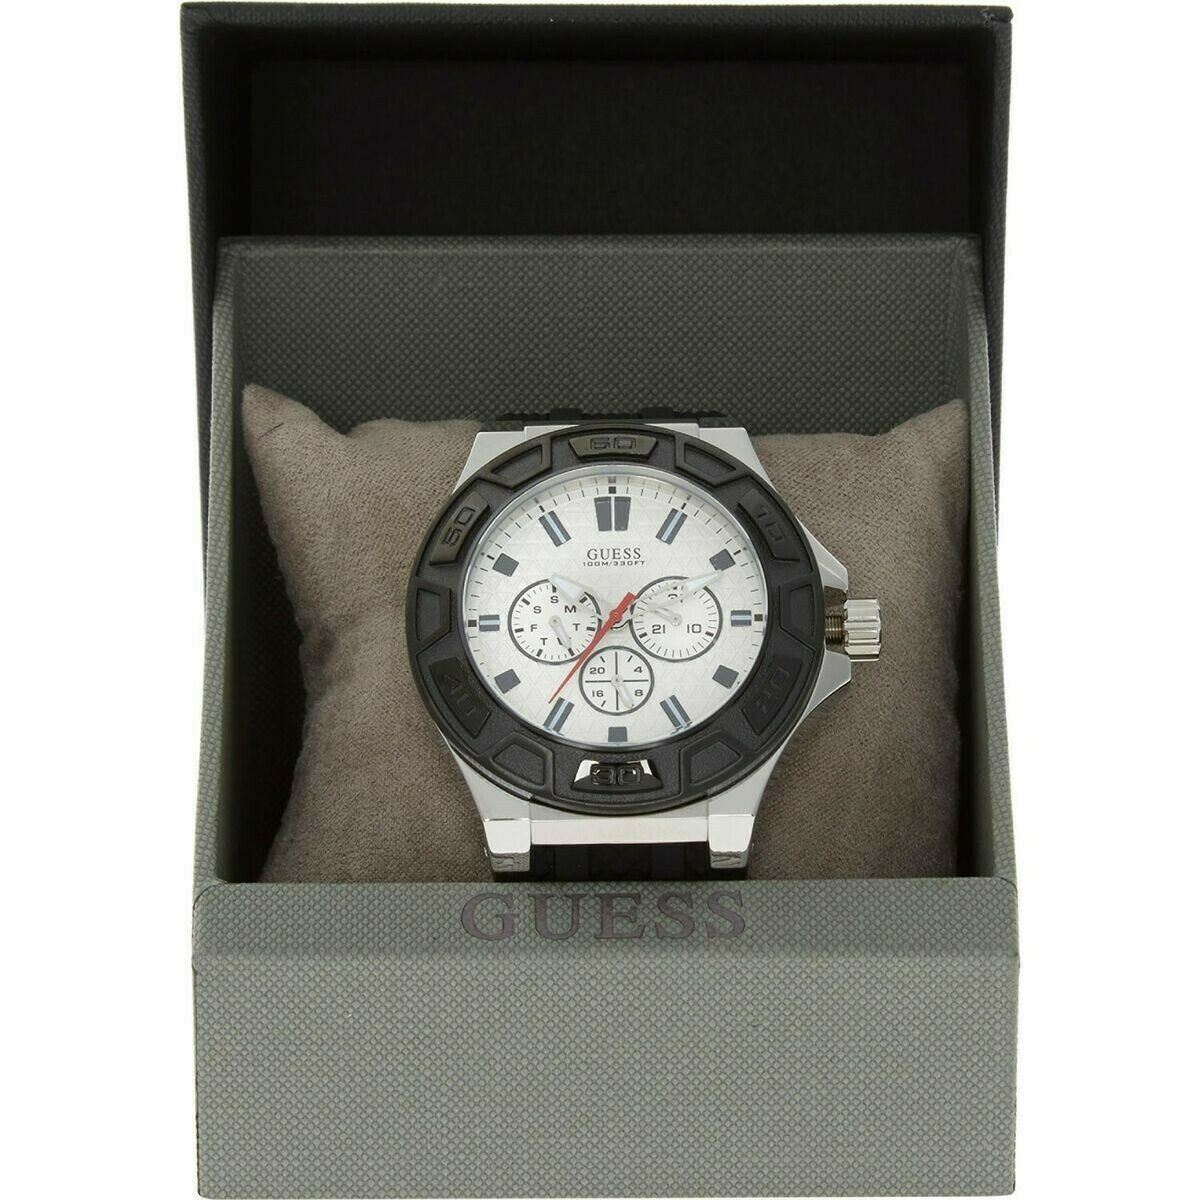 GUESS - FORCE Men's Chronograph Watch, Black Silicone Strap W0674G3